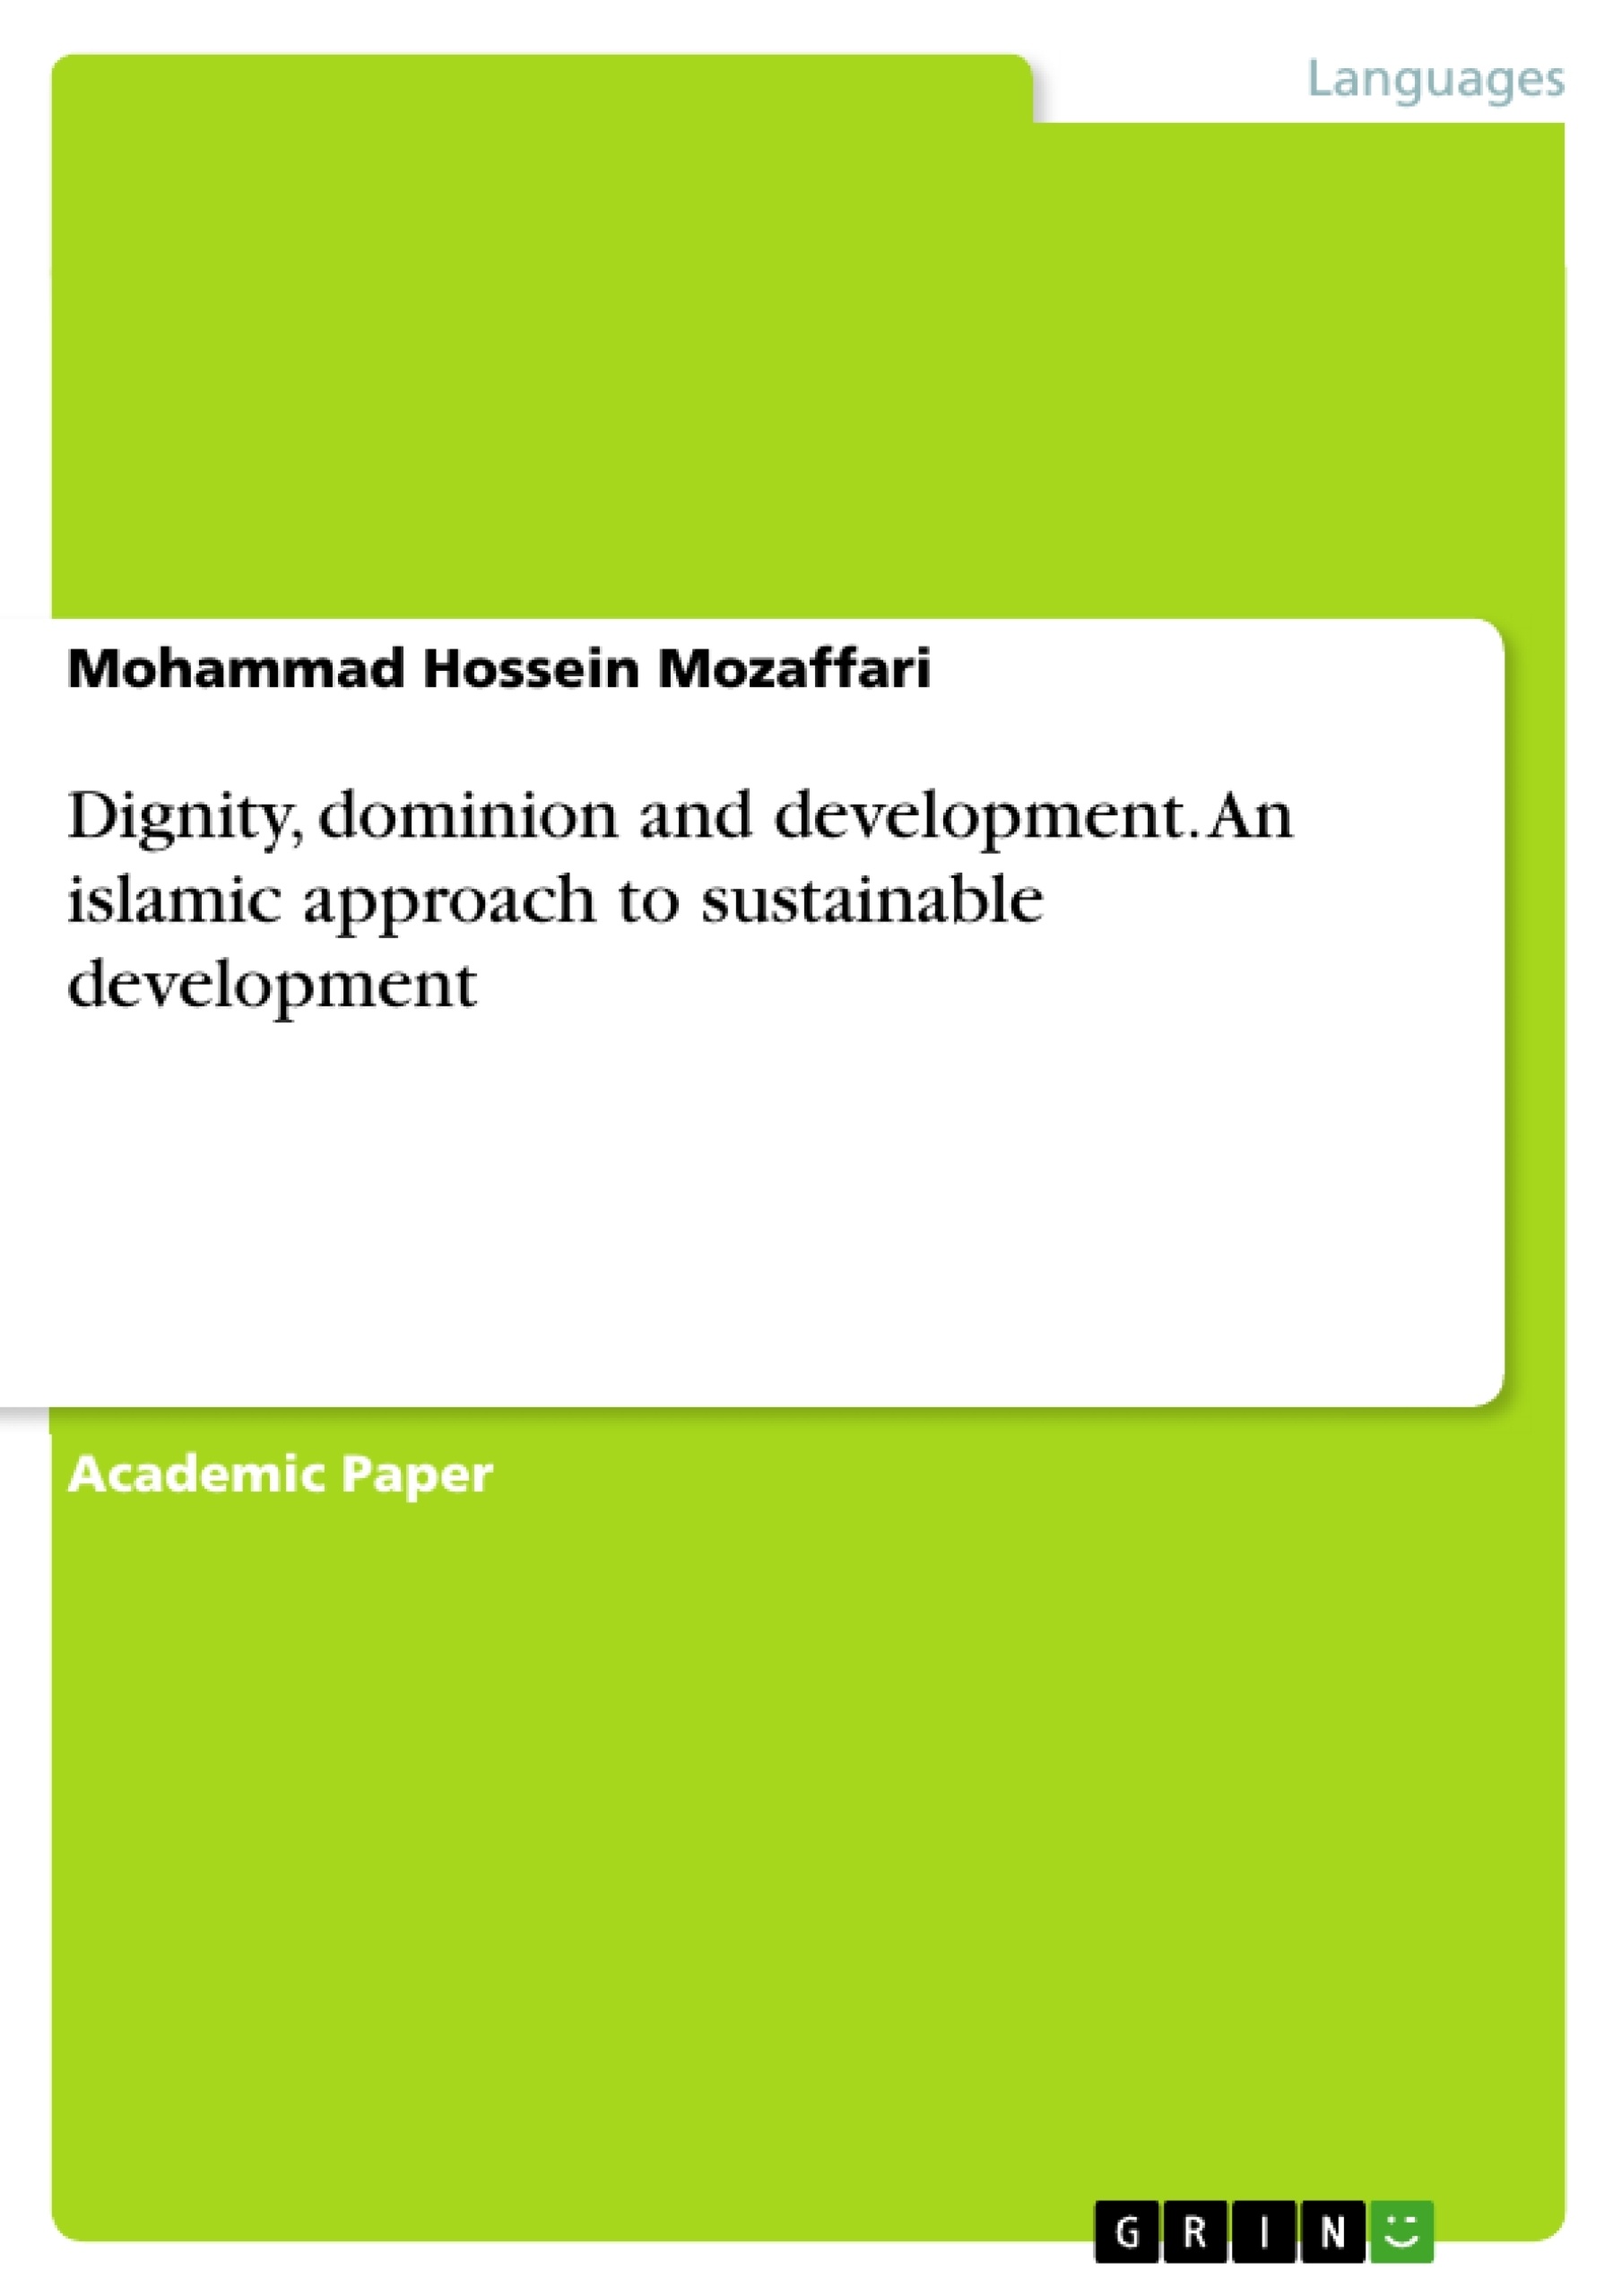 Title: Dignity, dominion and development. An islamic approach to sustainable development